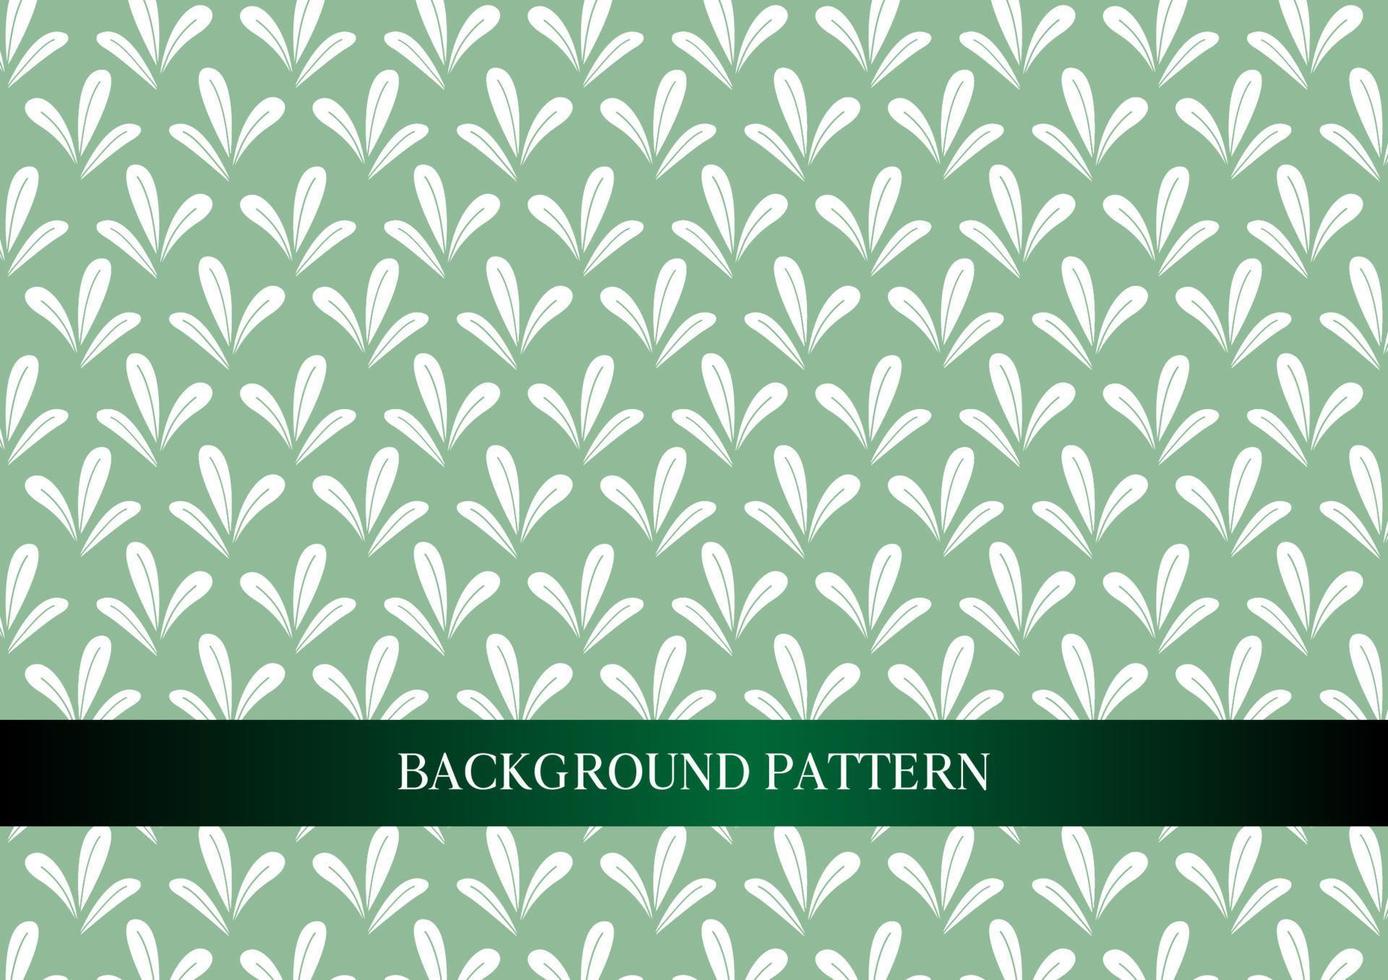 Cute seamless stylized green leaf pattern vector background